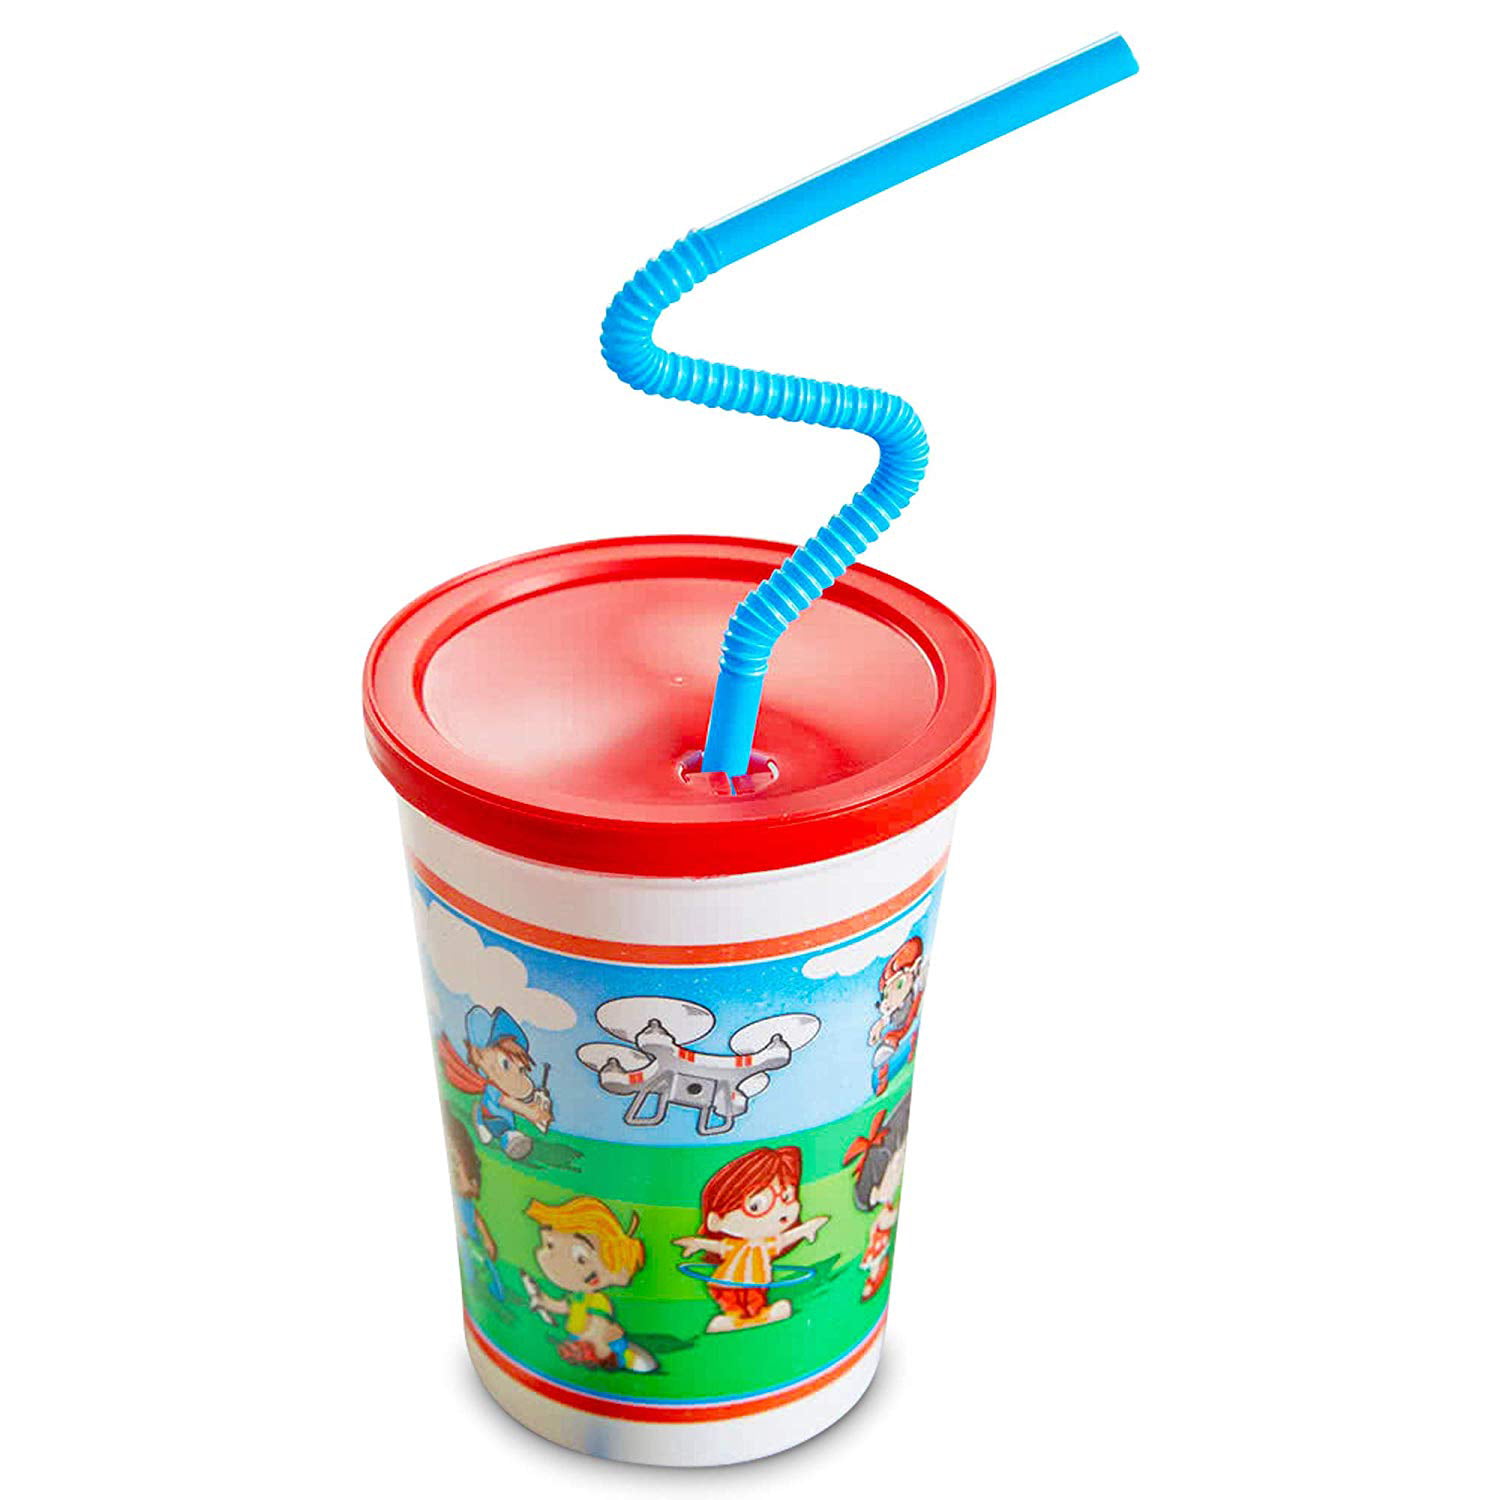 WNA Comet Plastic Kids' Cup with Lids and Straws Reviews 2023